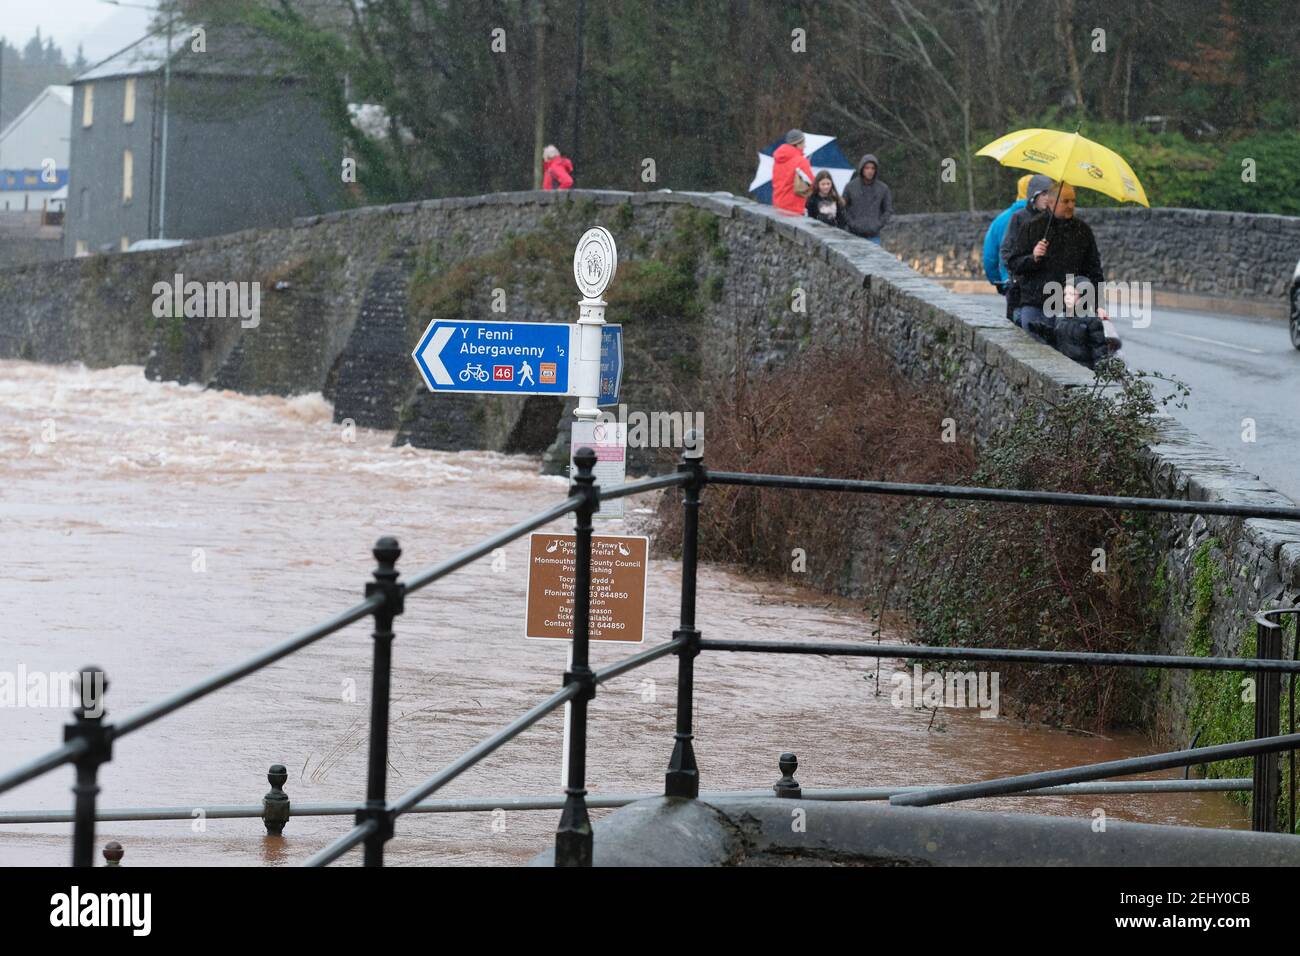 Abergavenny, Monmouthshire, Wales, UK - UK Weather - Saturday 20th February 2021 - The River Usk in fast flow has started to overflow its banks after heavy rain over the past 24 hours in south Wales. The forecast is for more rain. Photo Steven May / Alamy Live News Stock Photo